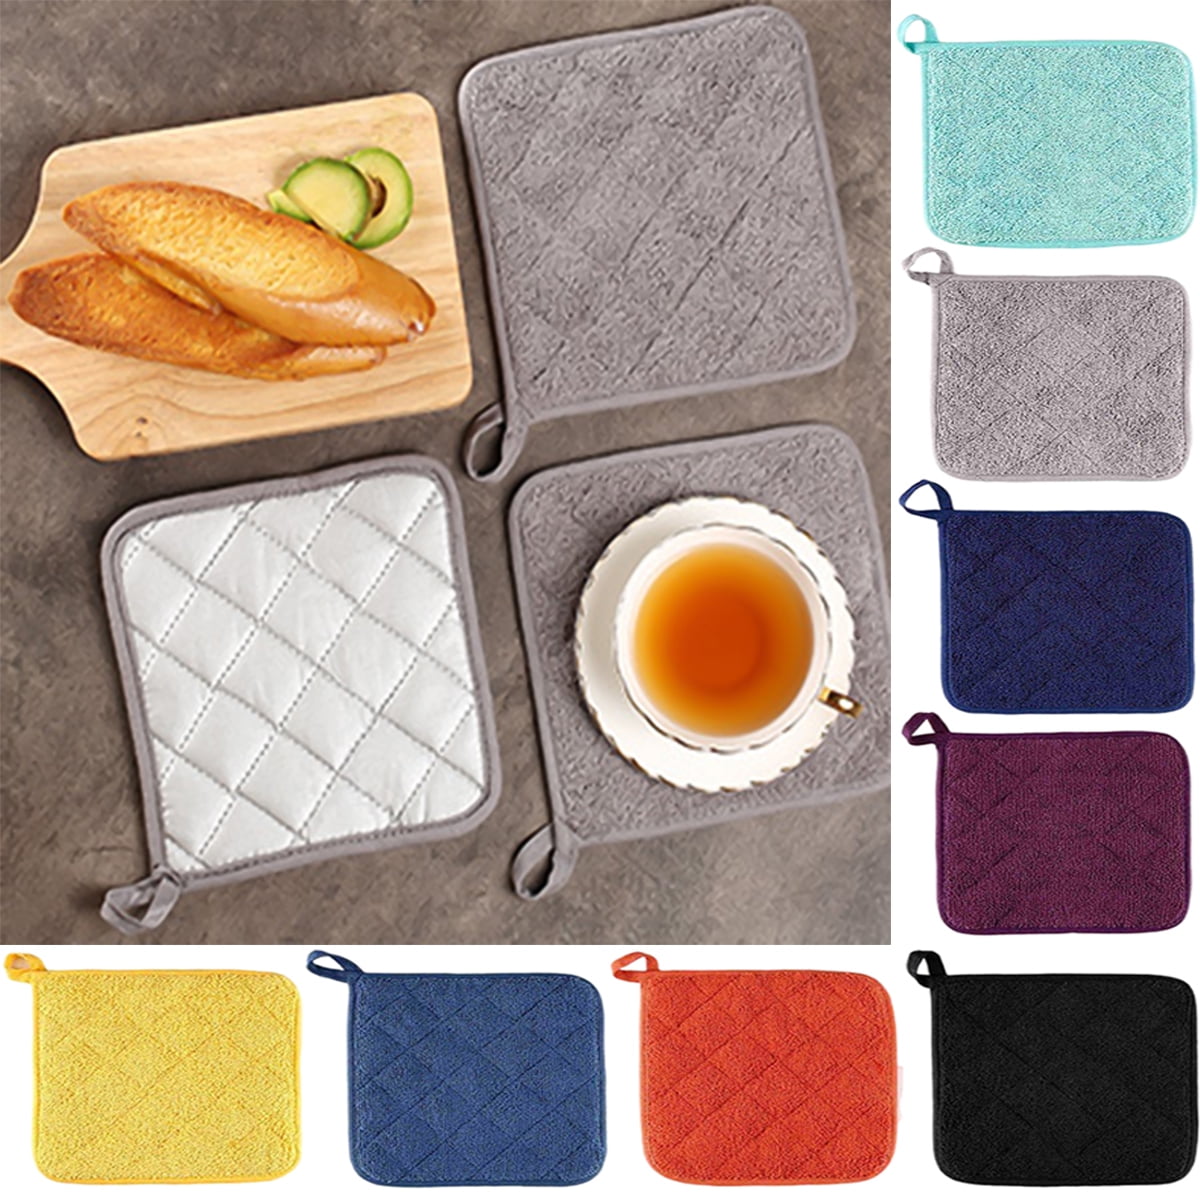 100% Cotton with Silicone Kitchen Everyday Basic Pot Holder Heat Resistant  Coaster Potholder Oven Mitts with Pocket for Cooking and Baking Set of 2